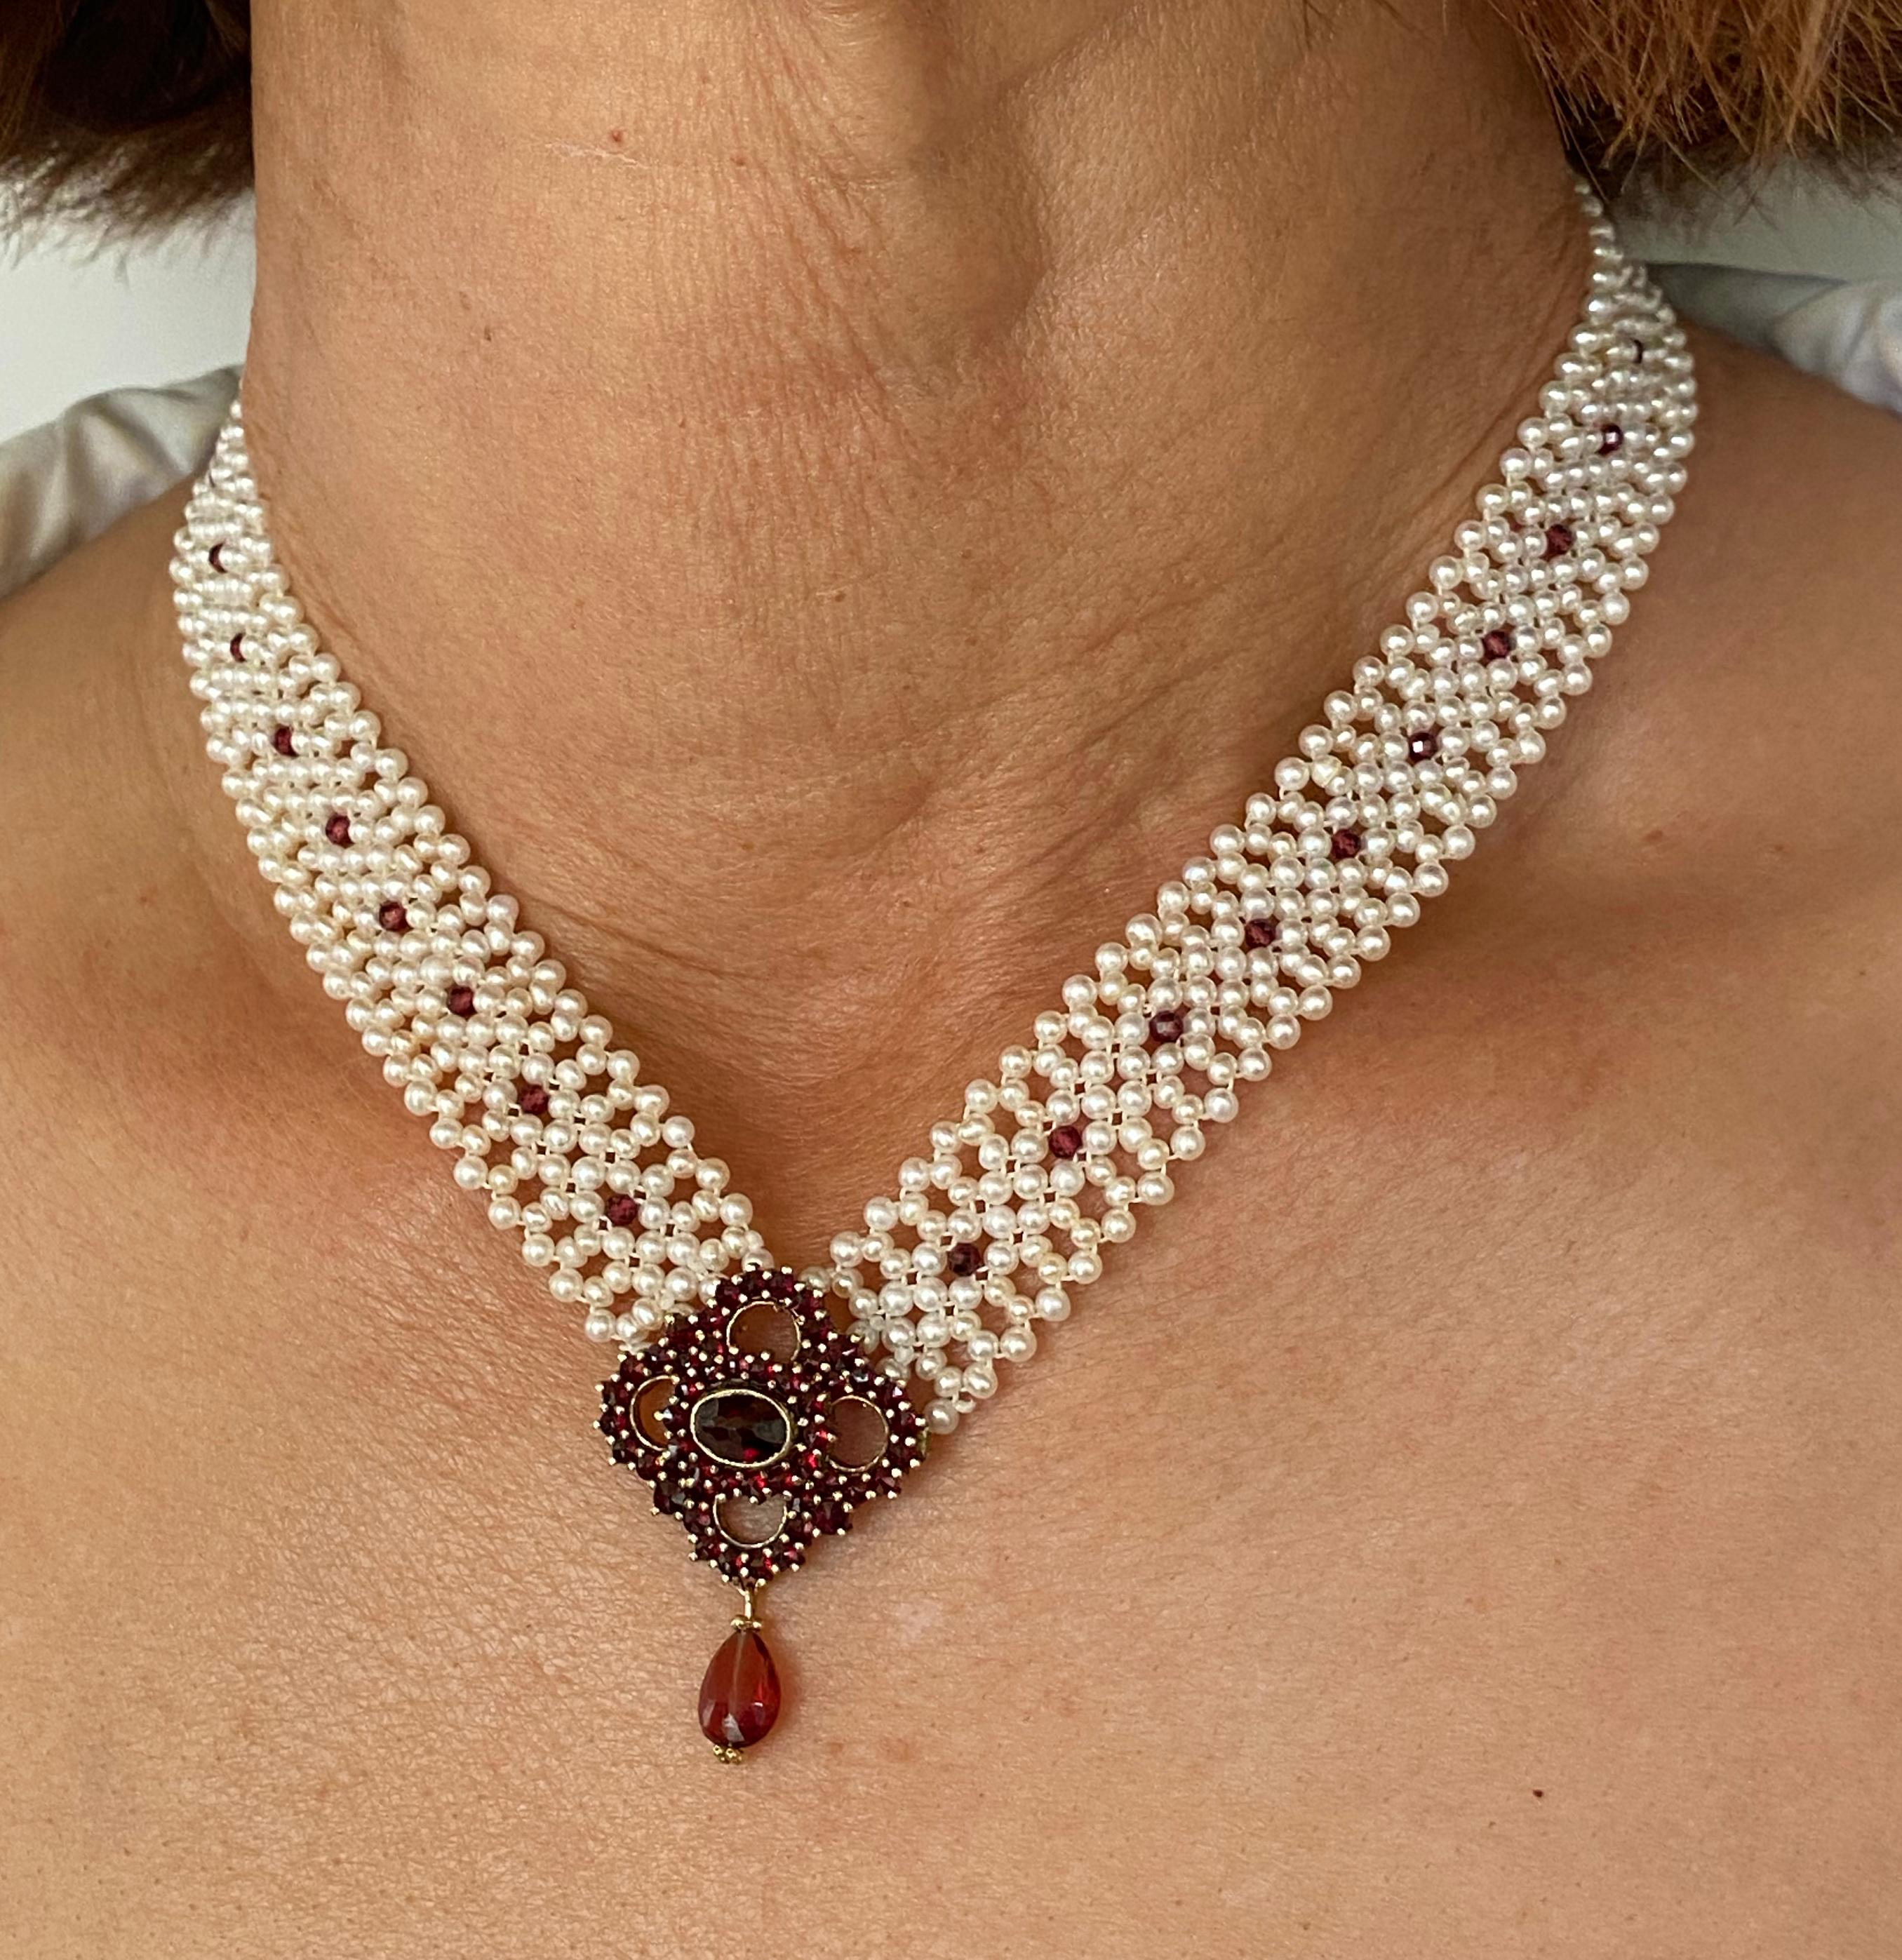 Beautiful 'V' Necklace by Marina J. This amazing piece features Cultured white Pearls all intricately woven together into a tight lace like design. Small Garnet beads are woven within the band of woven Pearls. An amazing one of a kind vintage Garnet